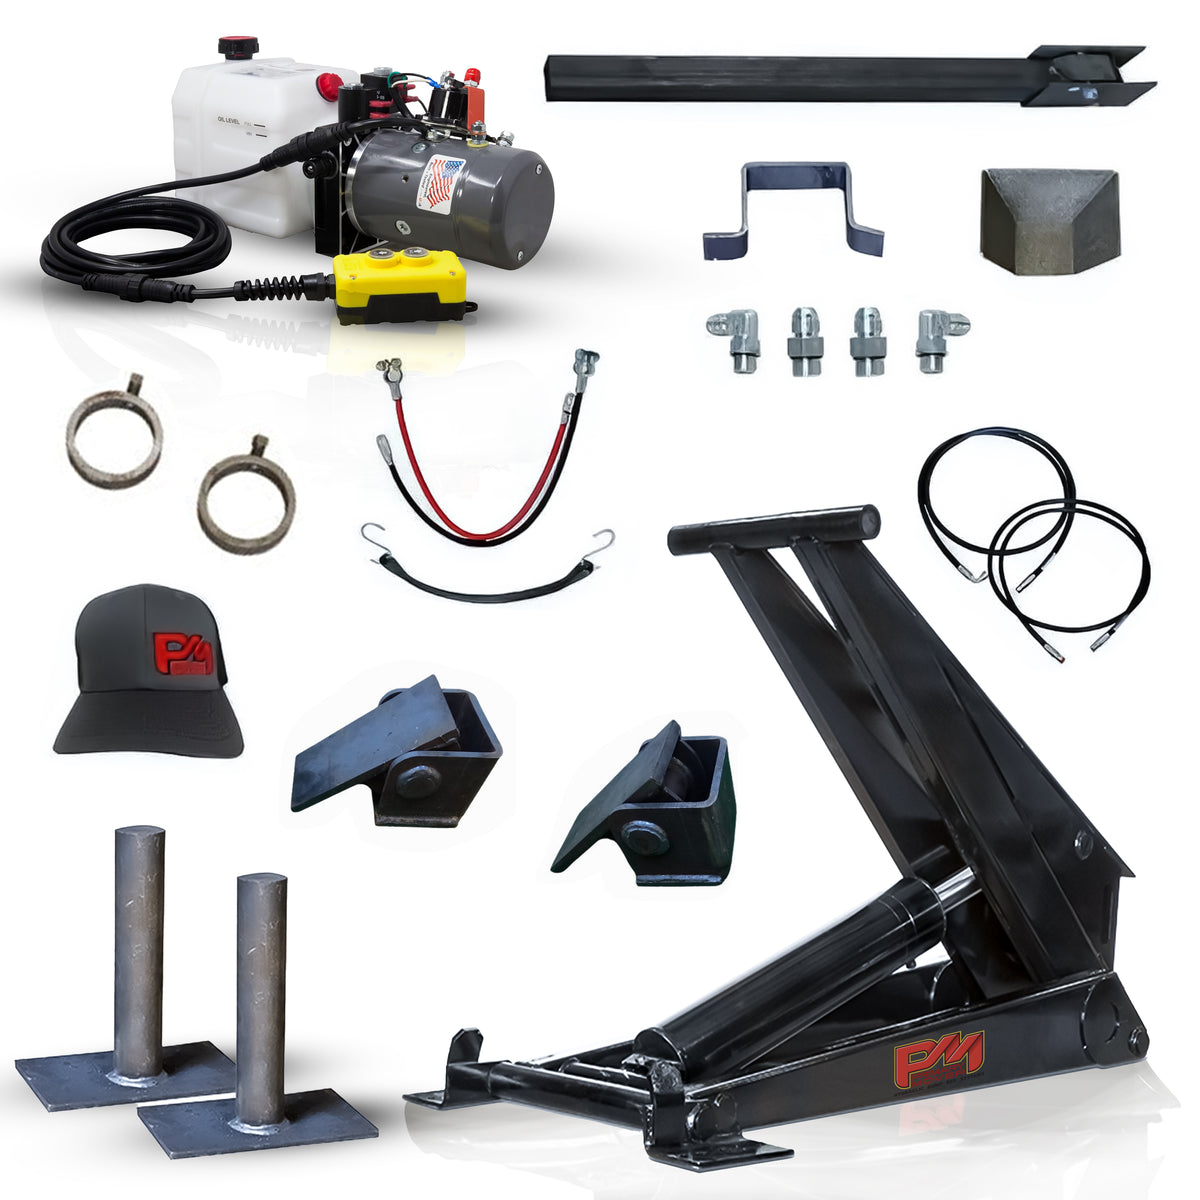 Hydraulic Scissor Hoist Kit - 12 Ton Capacity - Fits 16-20' Dump Body | PF-625: Collage of car hydraulic equipment, sticker on a barrel, red and yellow logo, metal rings, hydraulic components.